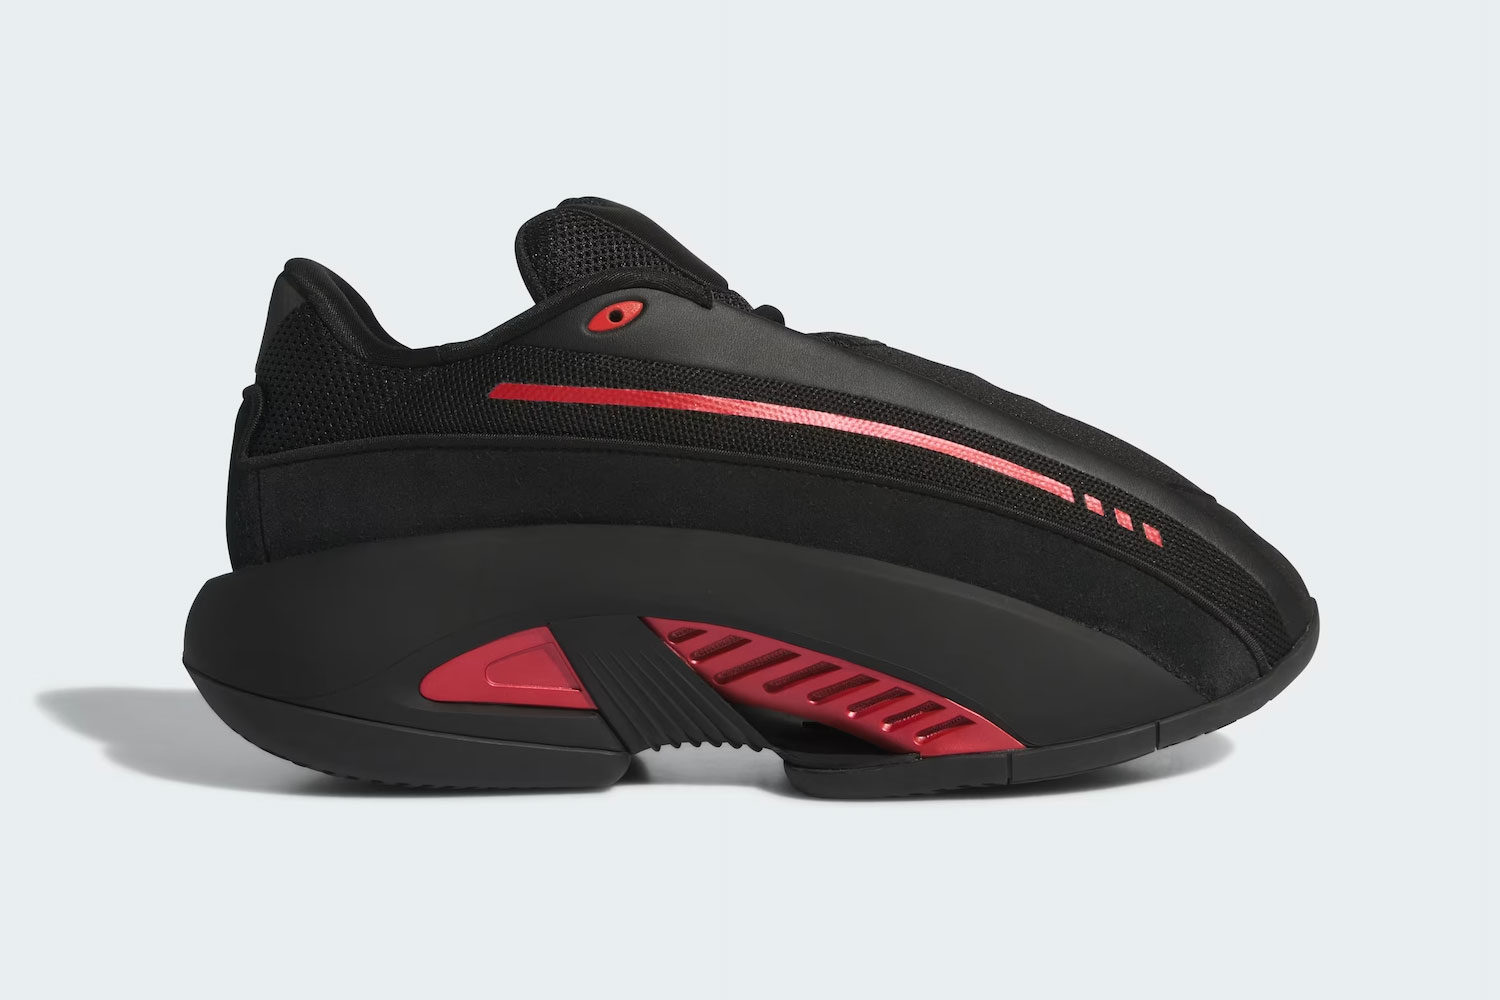 yeezy busta indonesia full version torrent "Core Black/Red" IF7125